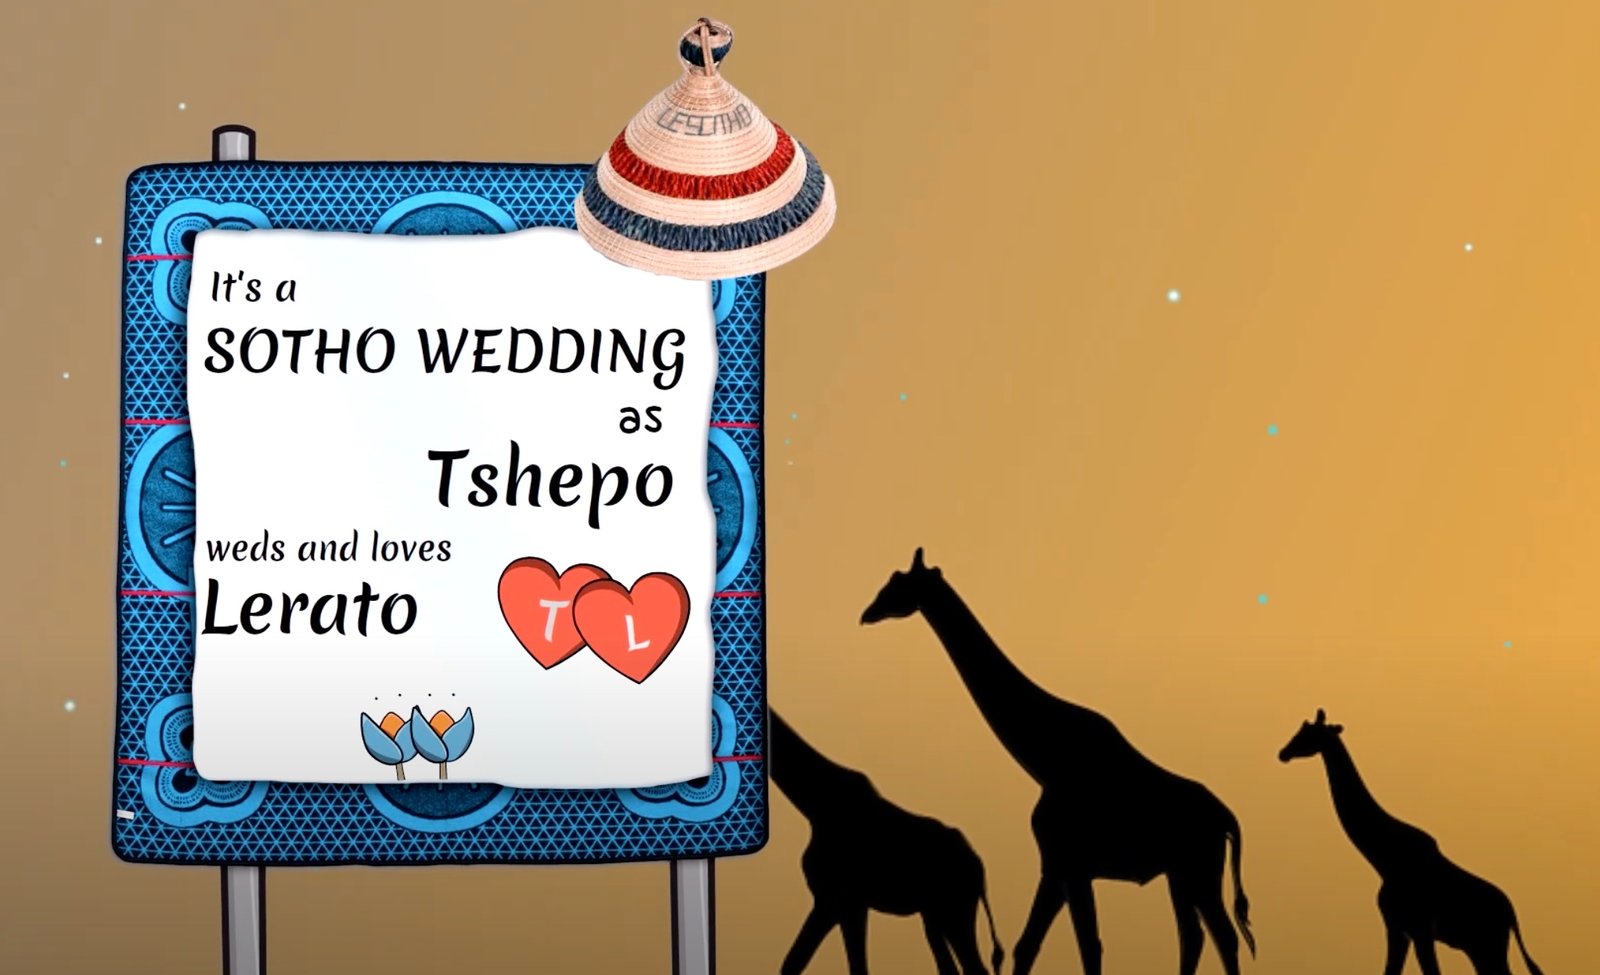 Umembeso Invitation Video Designs by Mansa Digital Revolutionises Wedding Invitations While Honouring South African Cultures and Traditions